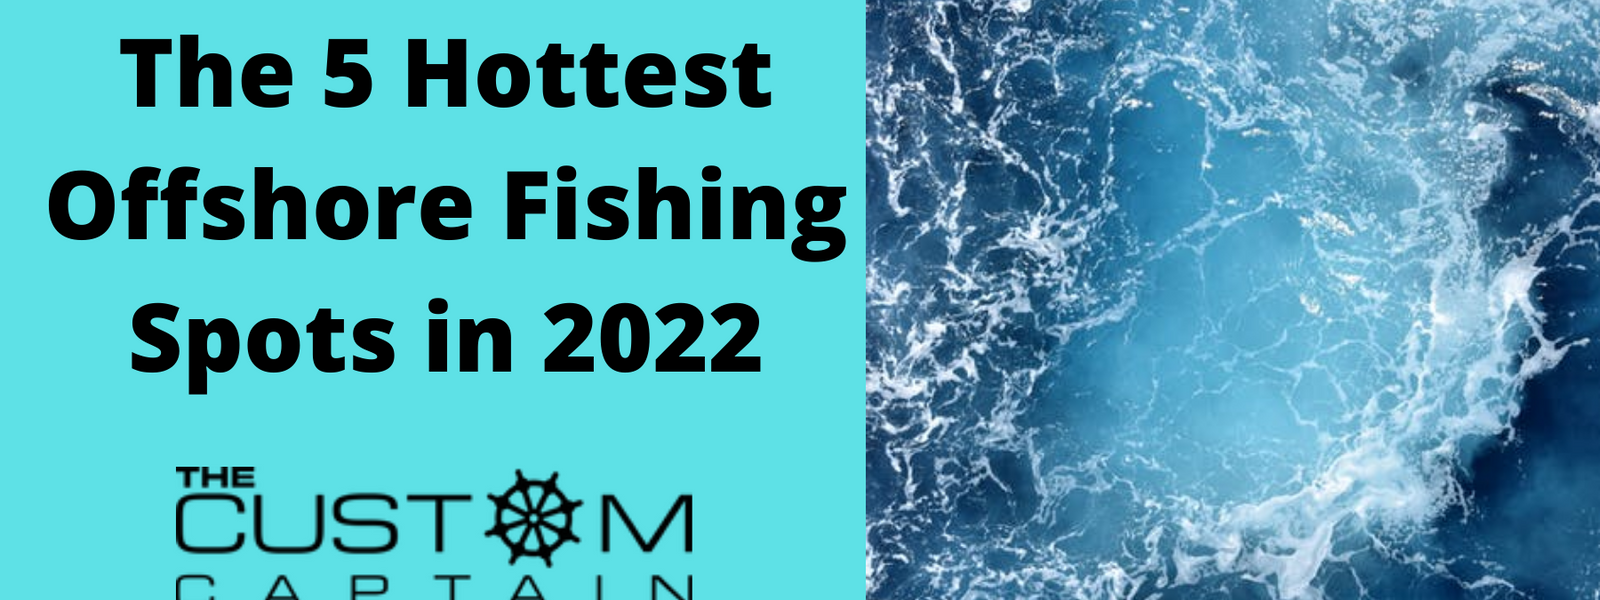 The 5 Hottest Offshore Fishing Spots in 2022